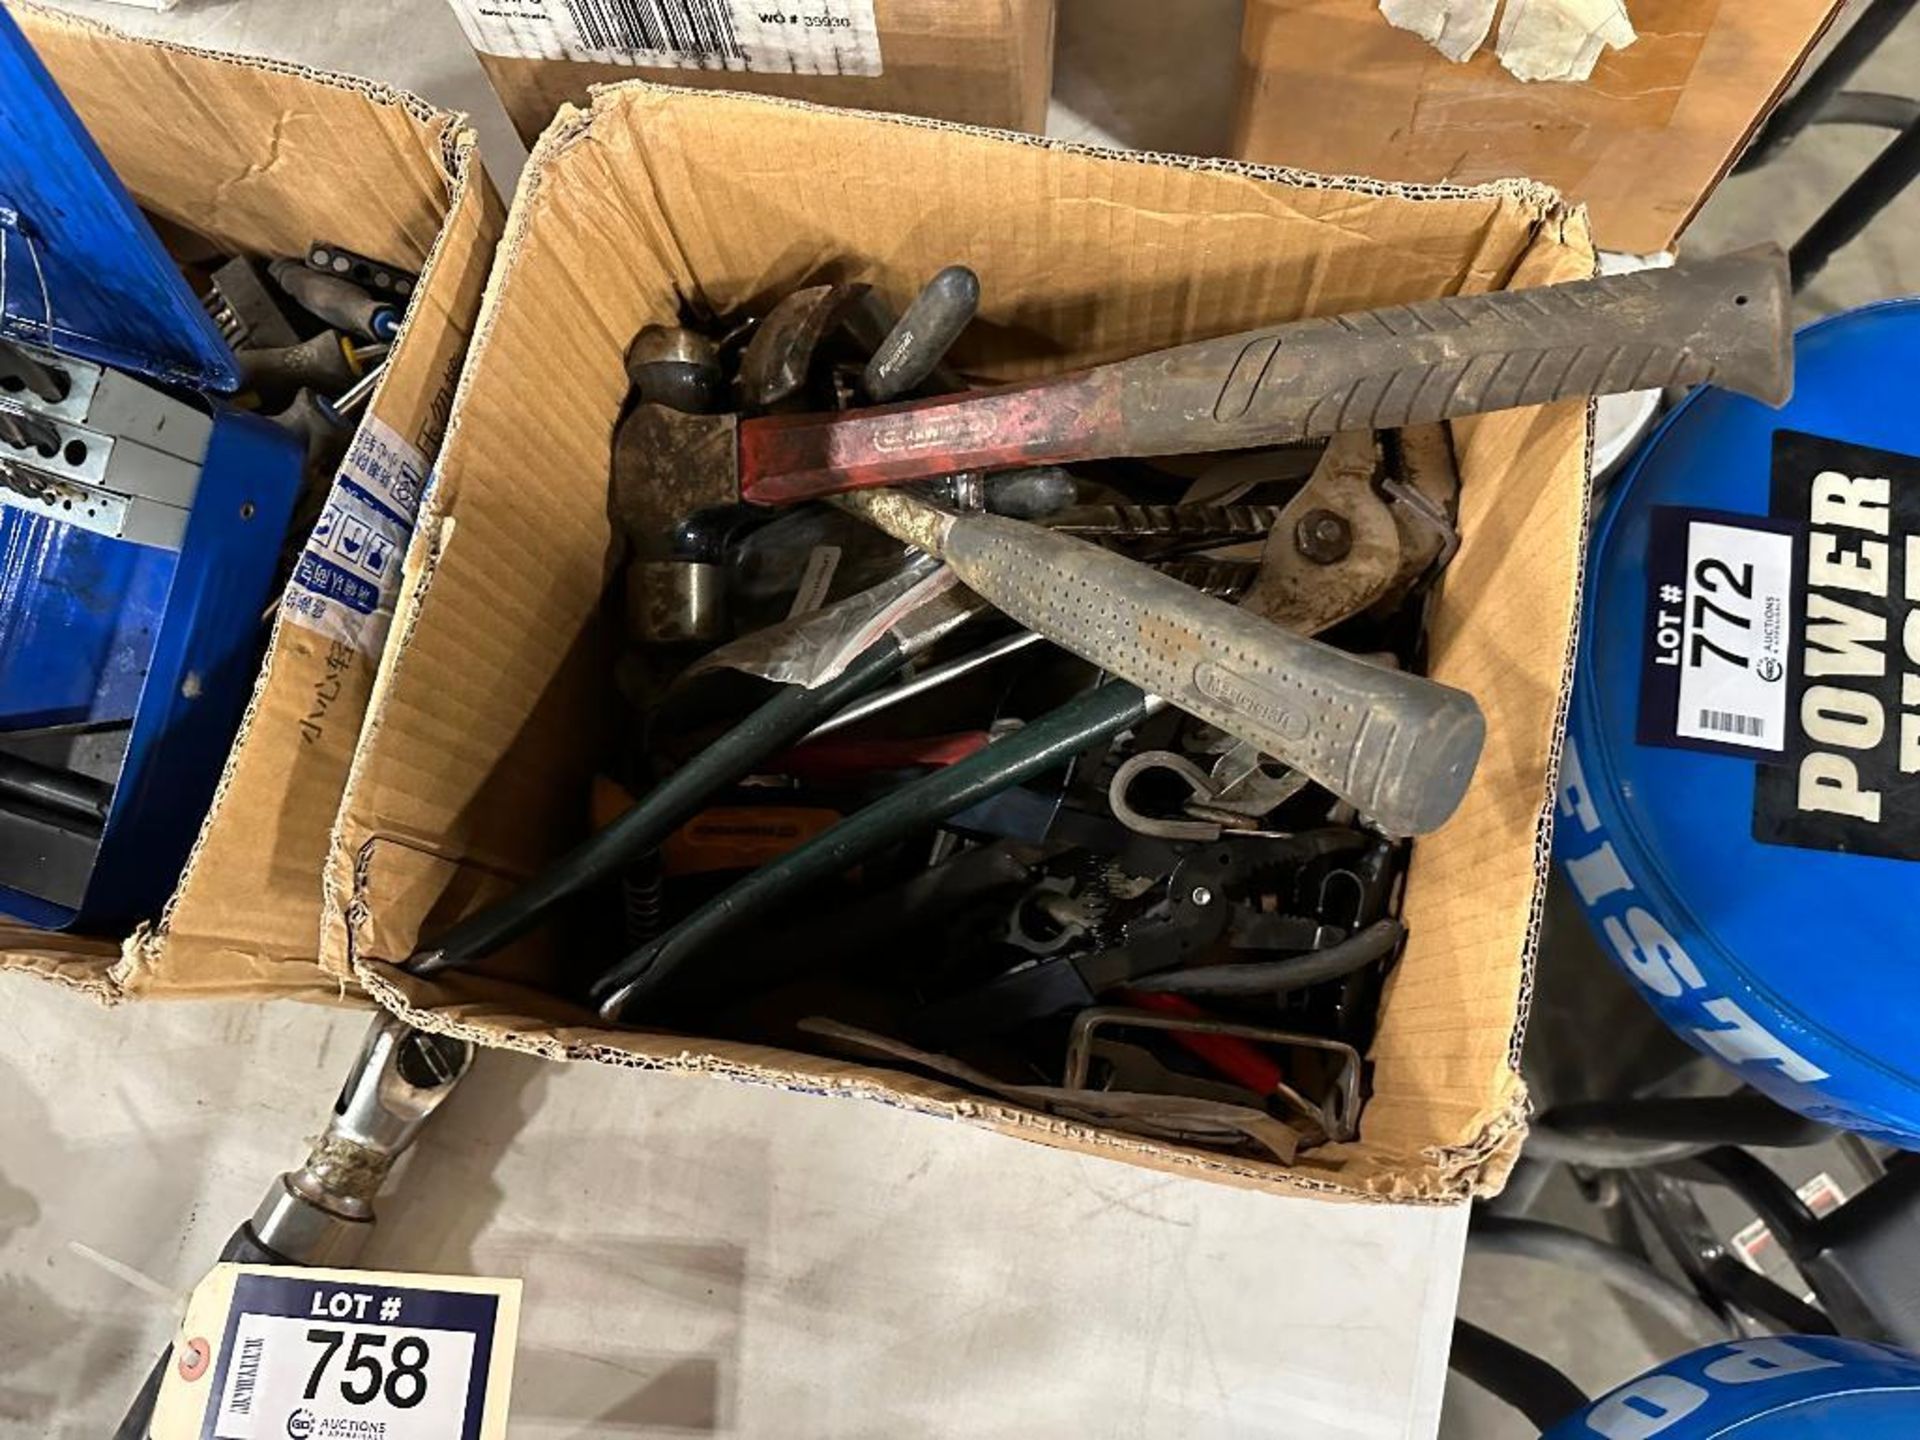 Lot of Asst. Hammers, Pliers, Wire Strippers, etc. - Image 3 of 5